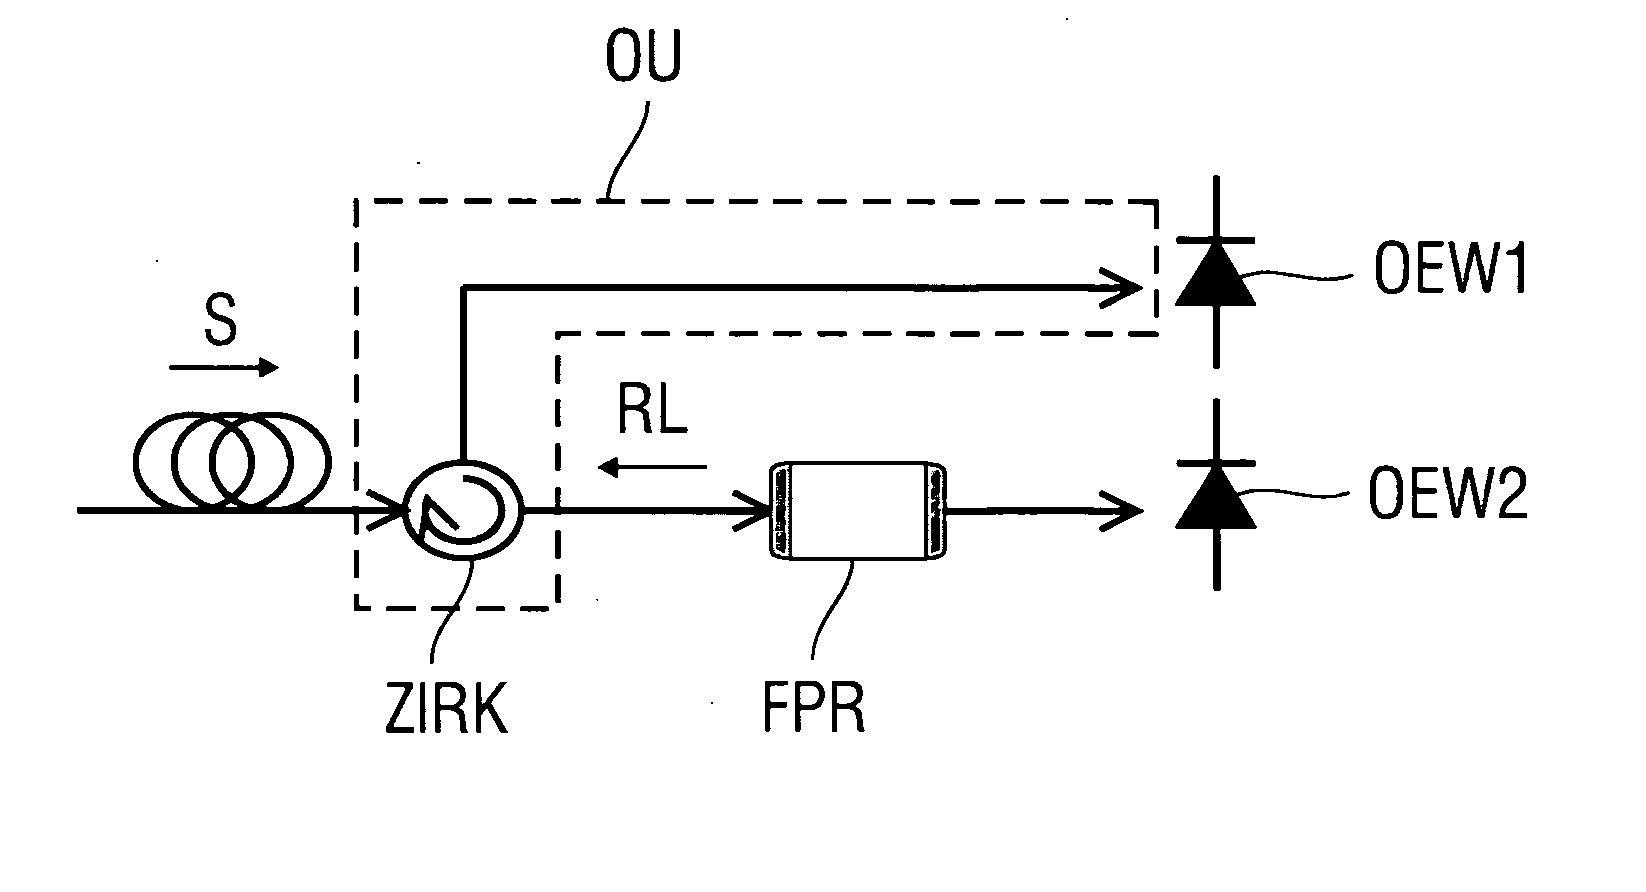 Receiver for angle-modulated optical signals